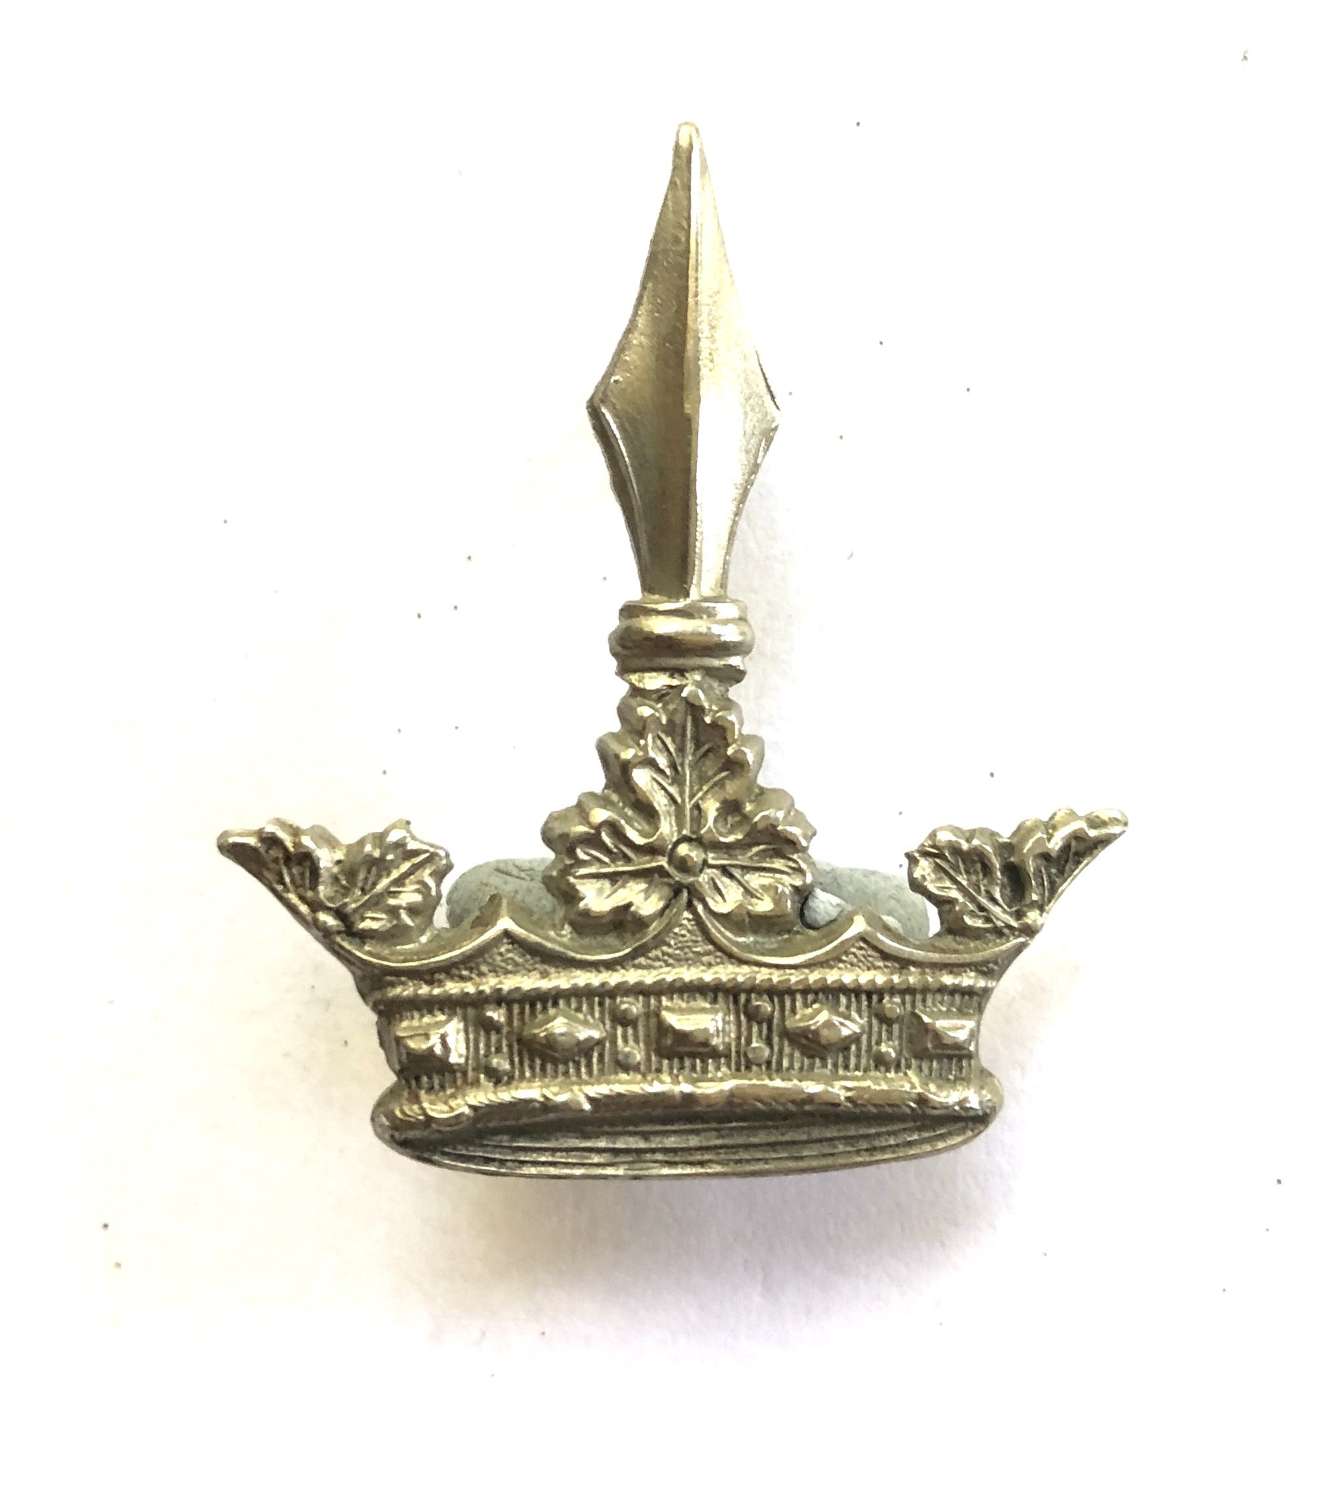 Surrey Imperial Yeomanry scarce OR’s white metal cap badge